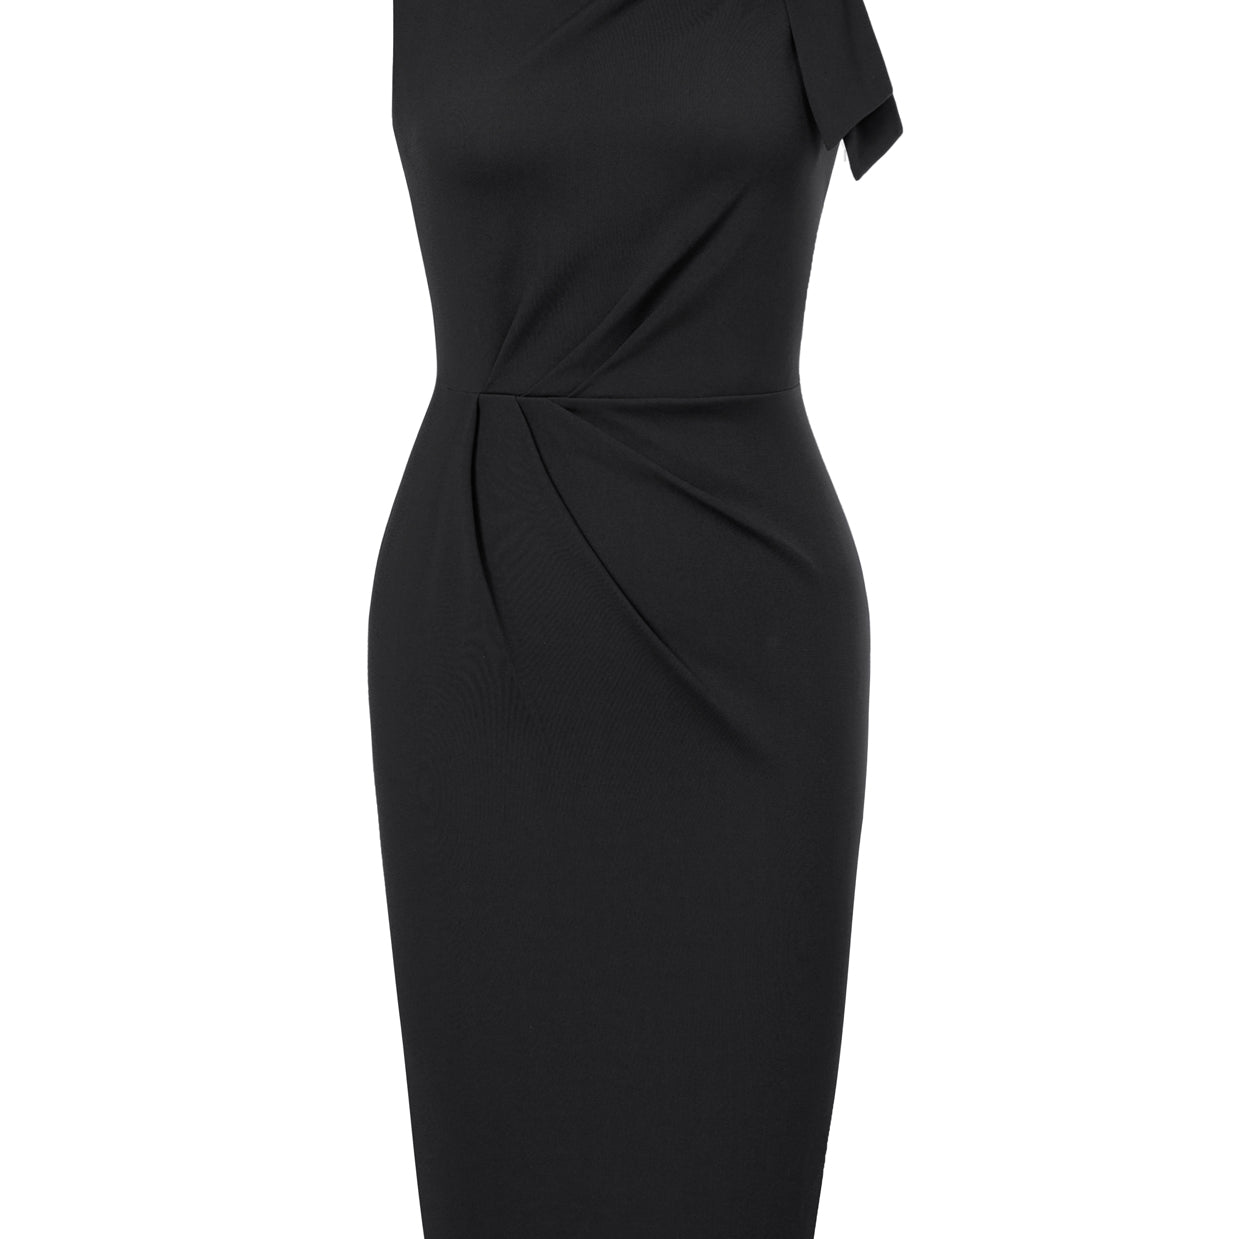 Seckill Offer⌛Sleeveless Ruched Bodycon Dress with Tie Shoulder Business Cocktail Party Wedding Guest Dress